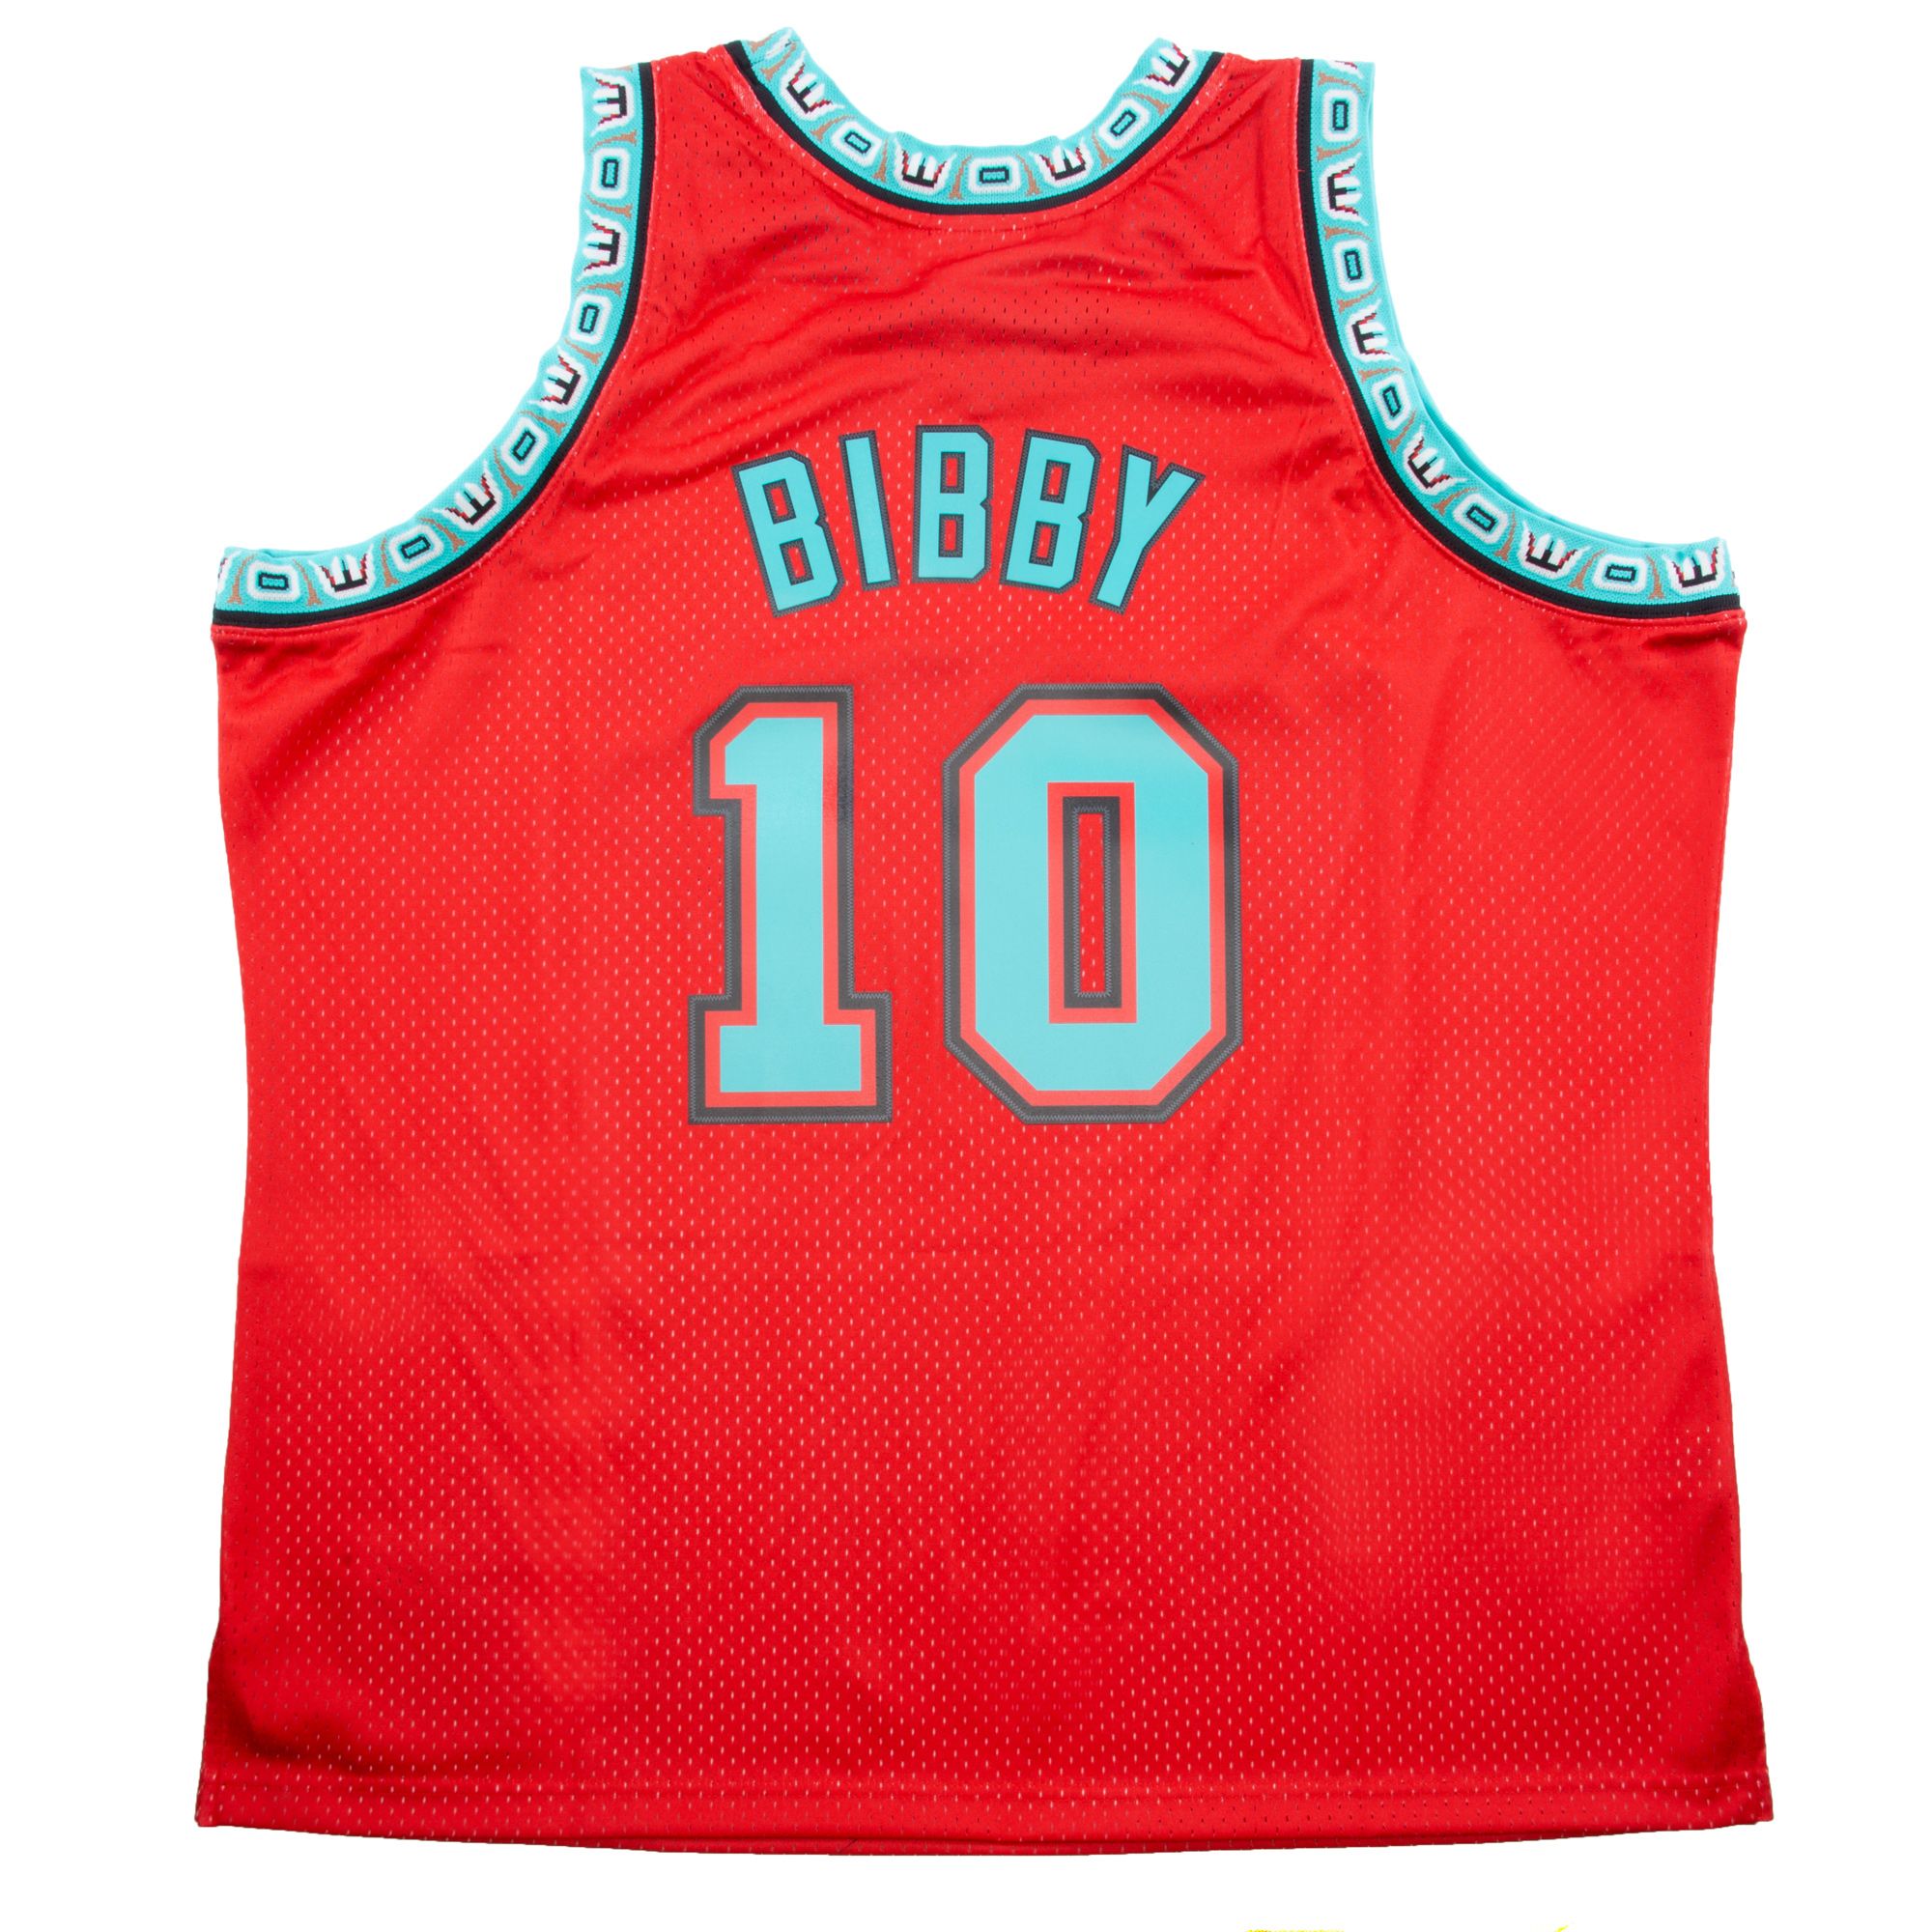 mike bibby throwback jersey